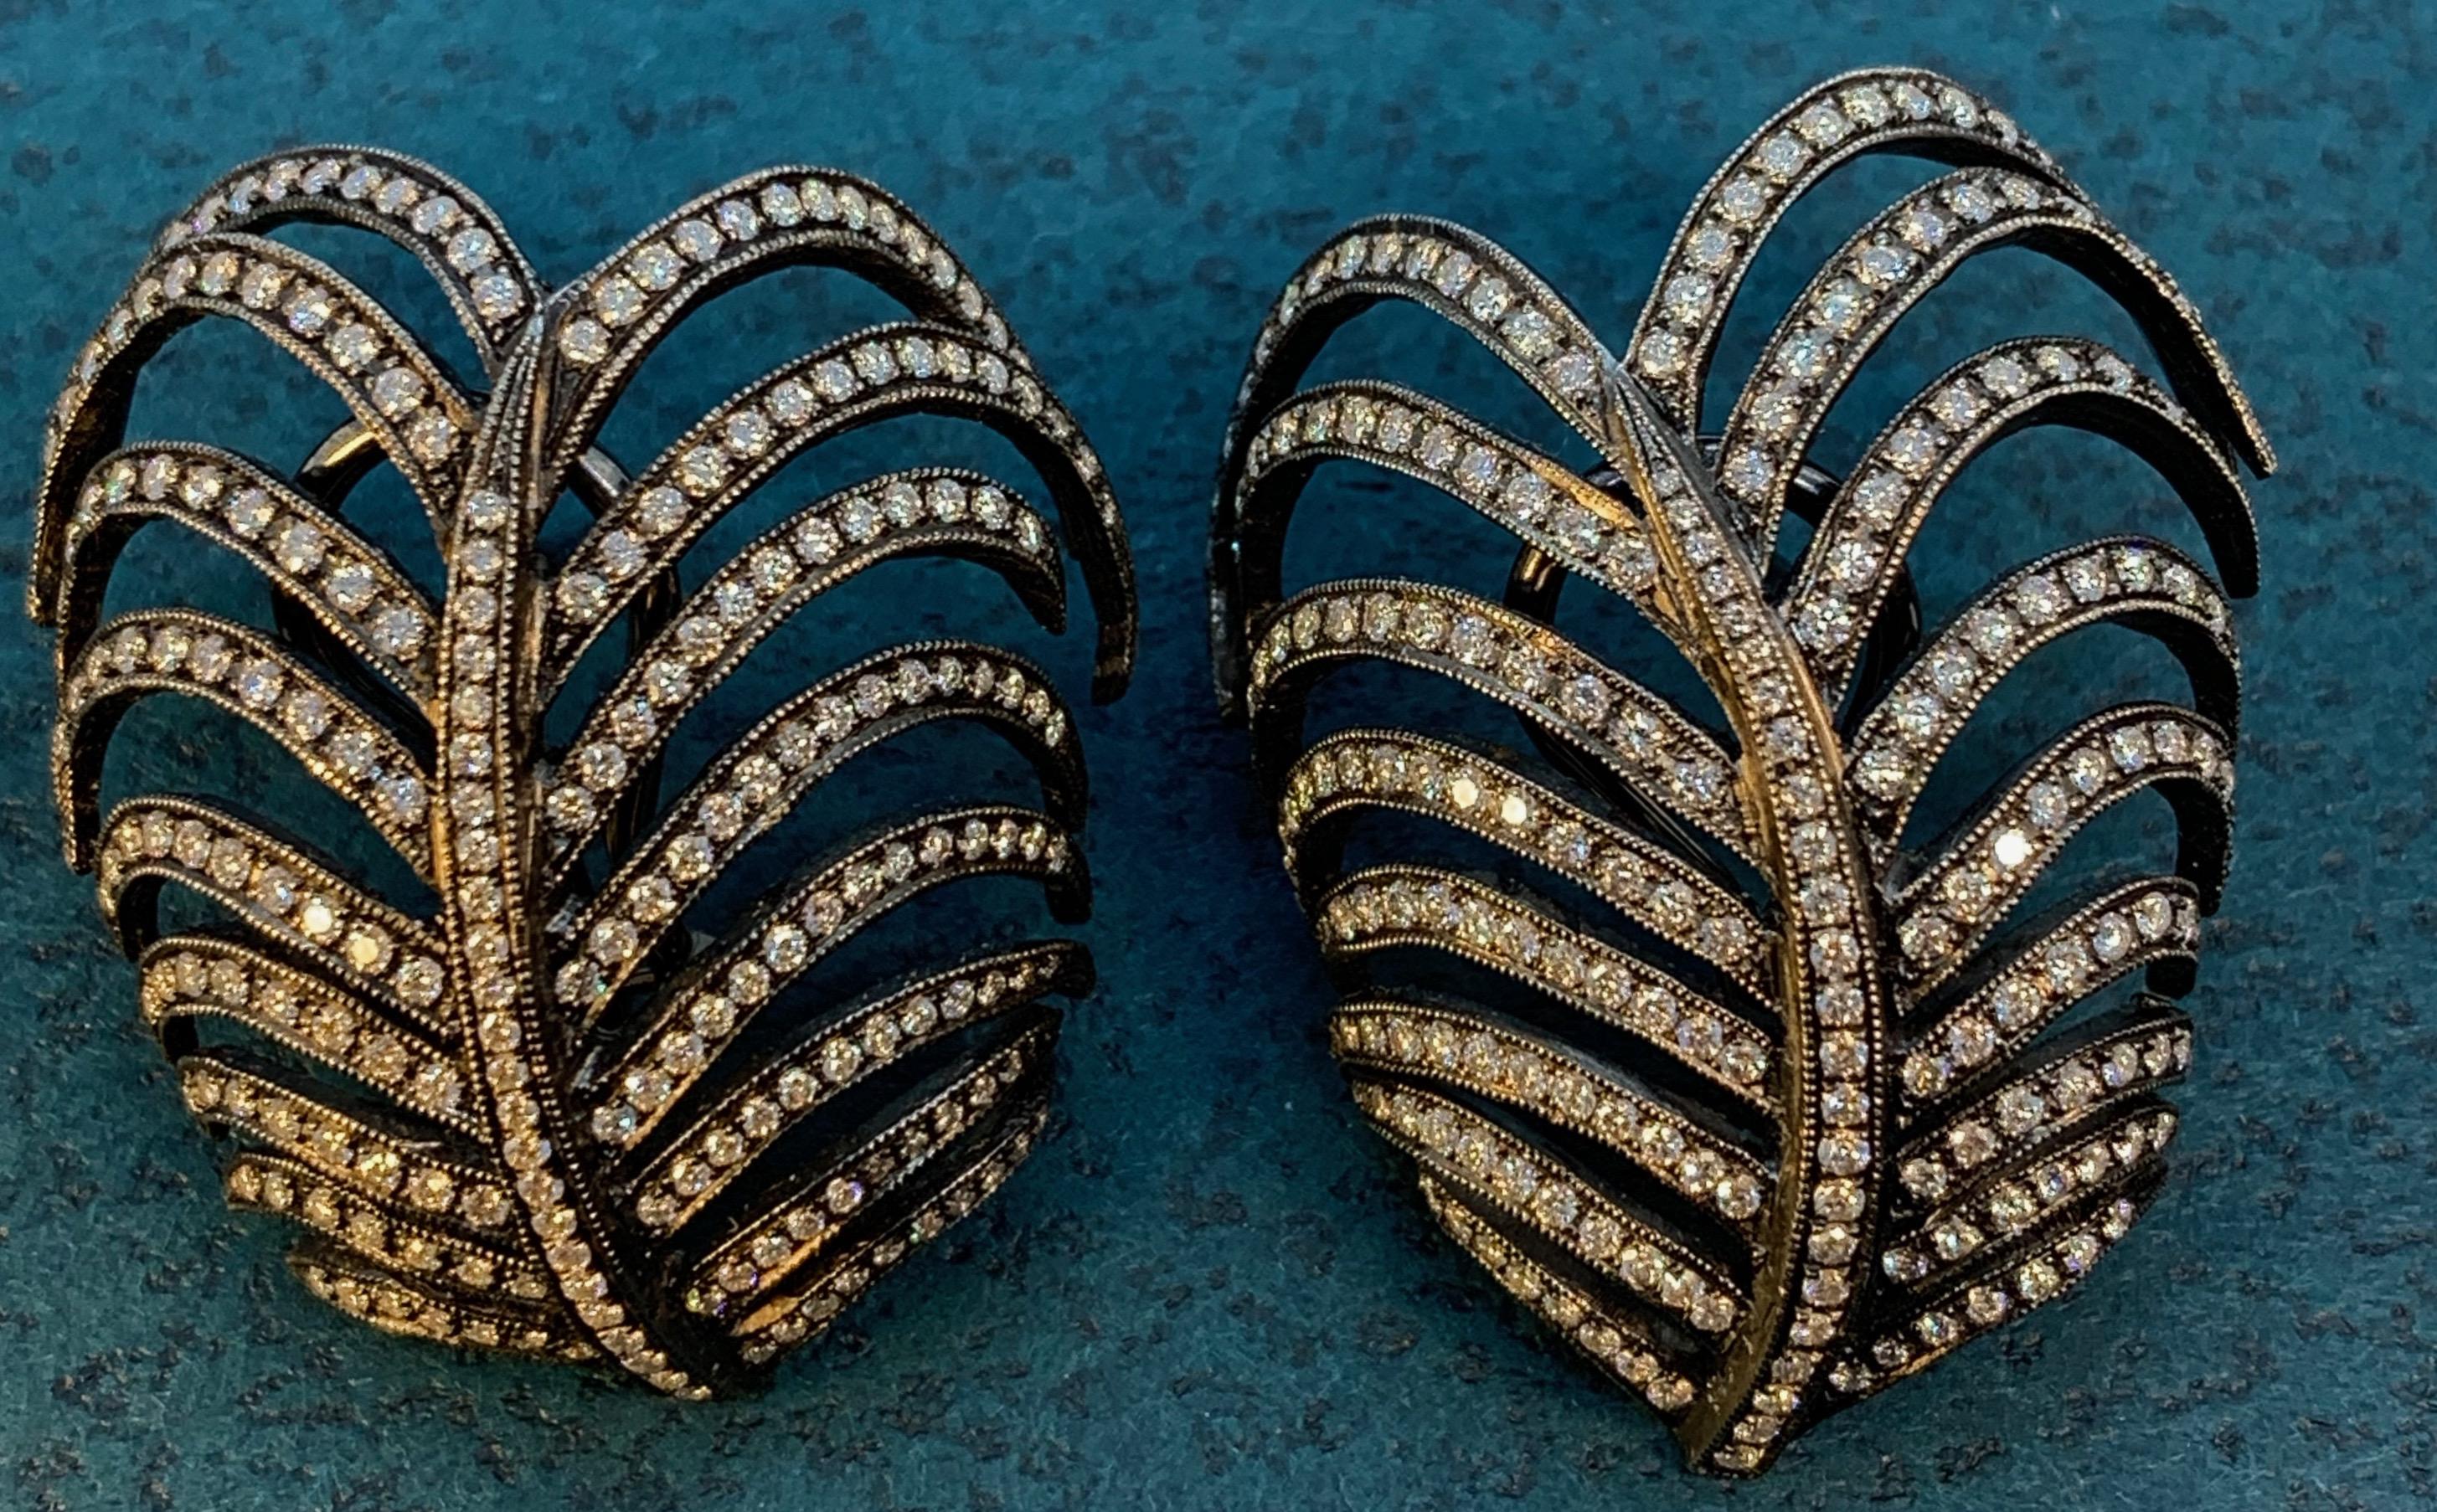 These meticulously hand-set, one-of-a-kind earrings are based on the graceful fronds of Australia's kentia palms.  The designer, Eytan Brandes, made a conscious decision to cast the earrings in two molds so that, instead of mirror images, they're